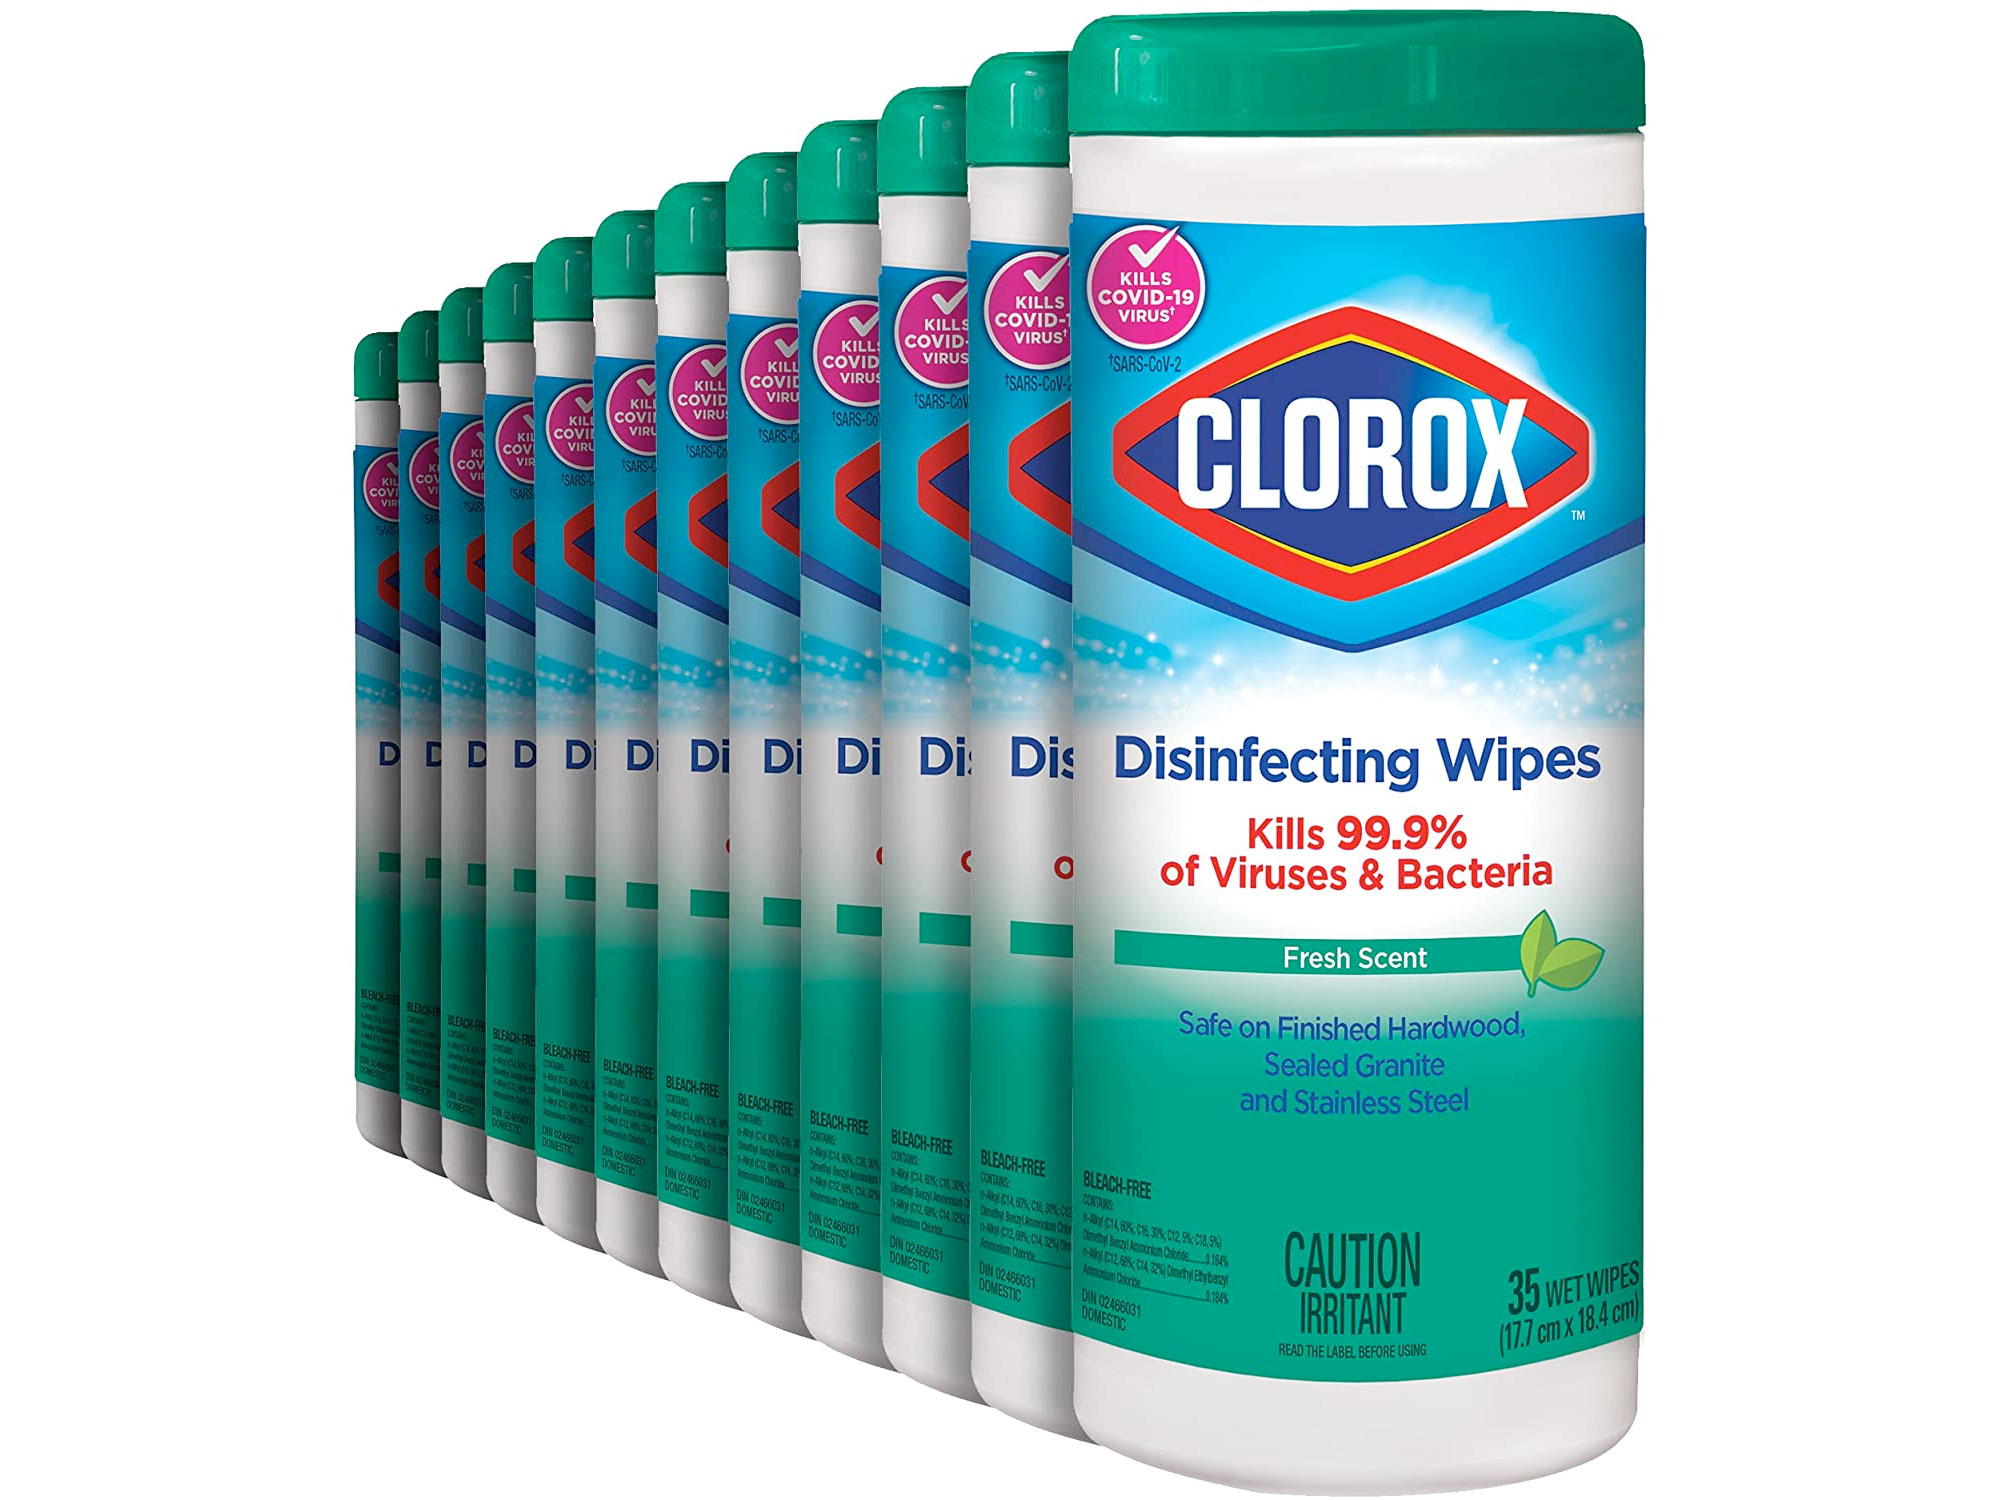 Amazon：Clorox Disinfecting Wipes (35 Wipes, 12 Canisters)只賣$23.64